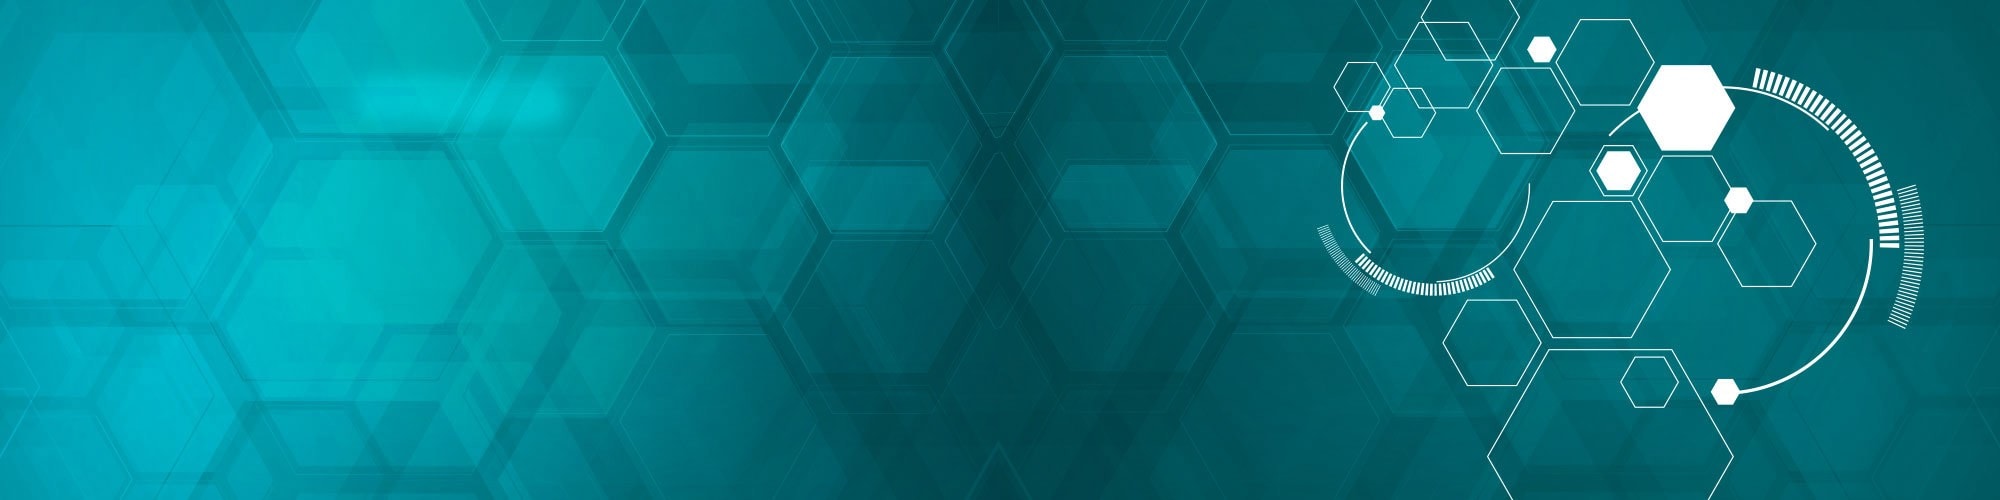 Teal abstract honeycomb background with white line art overlay